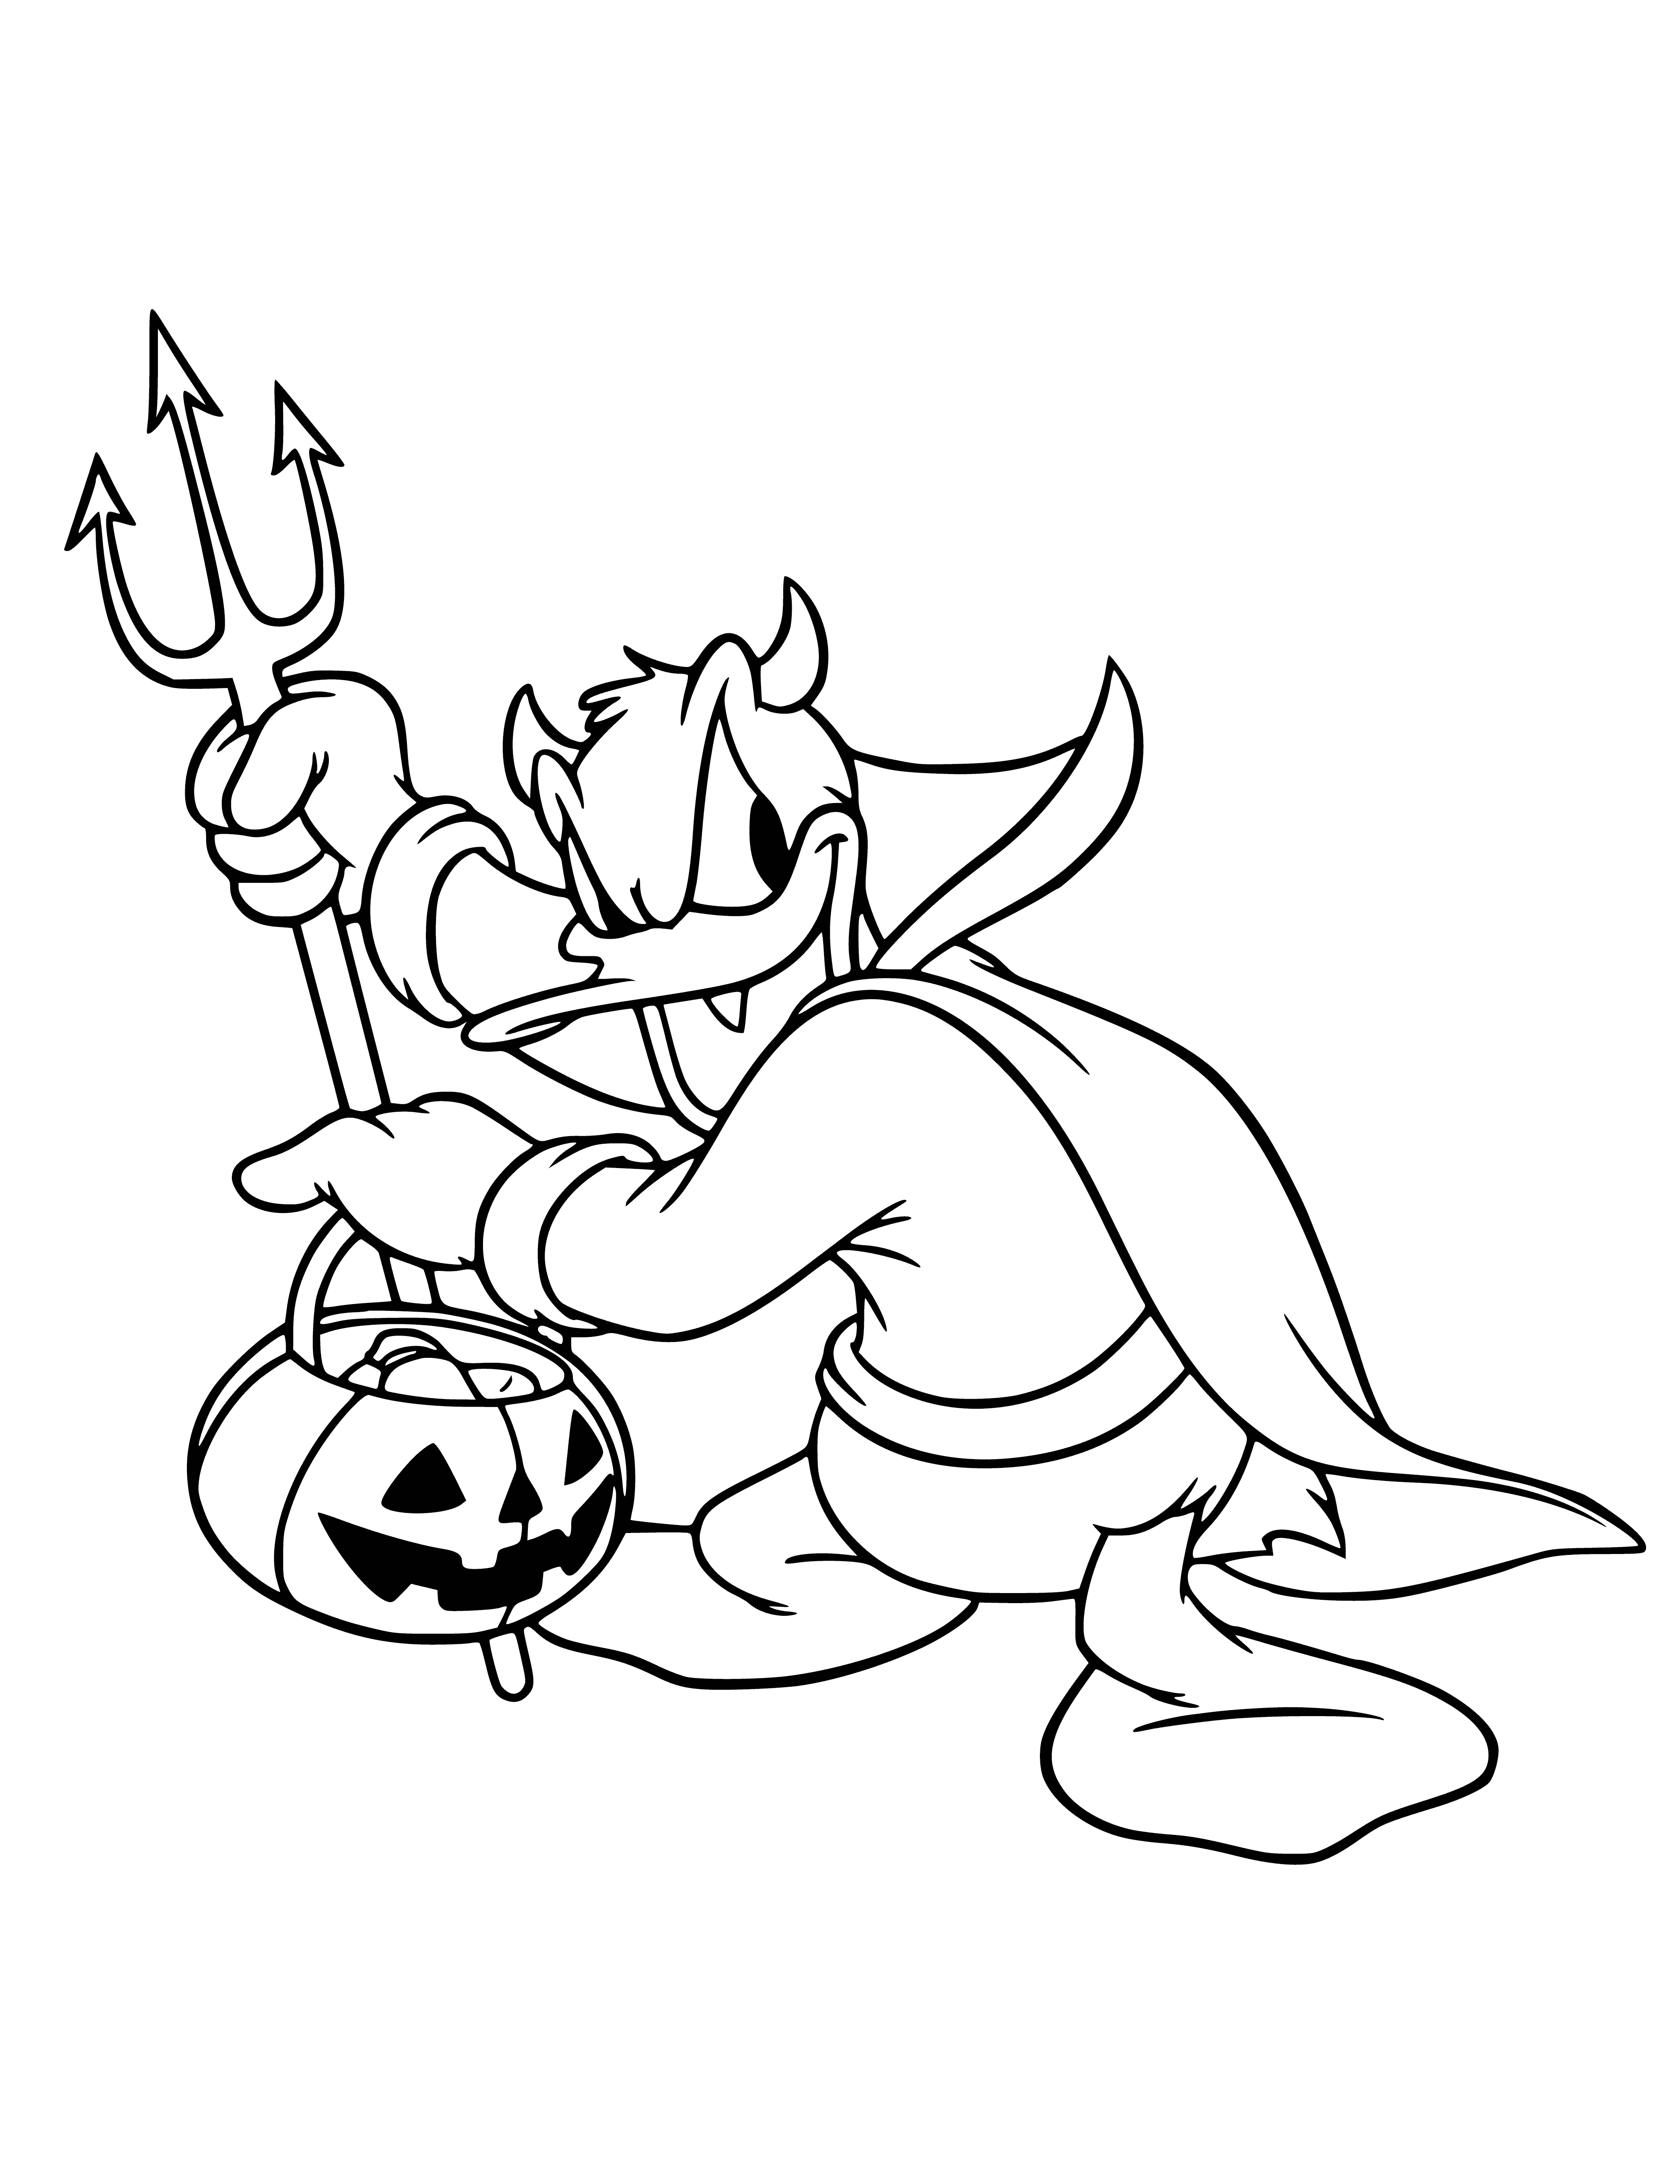 Donald Duck on Halloween coloring page